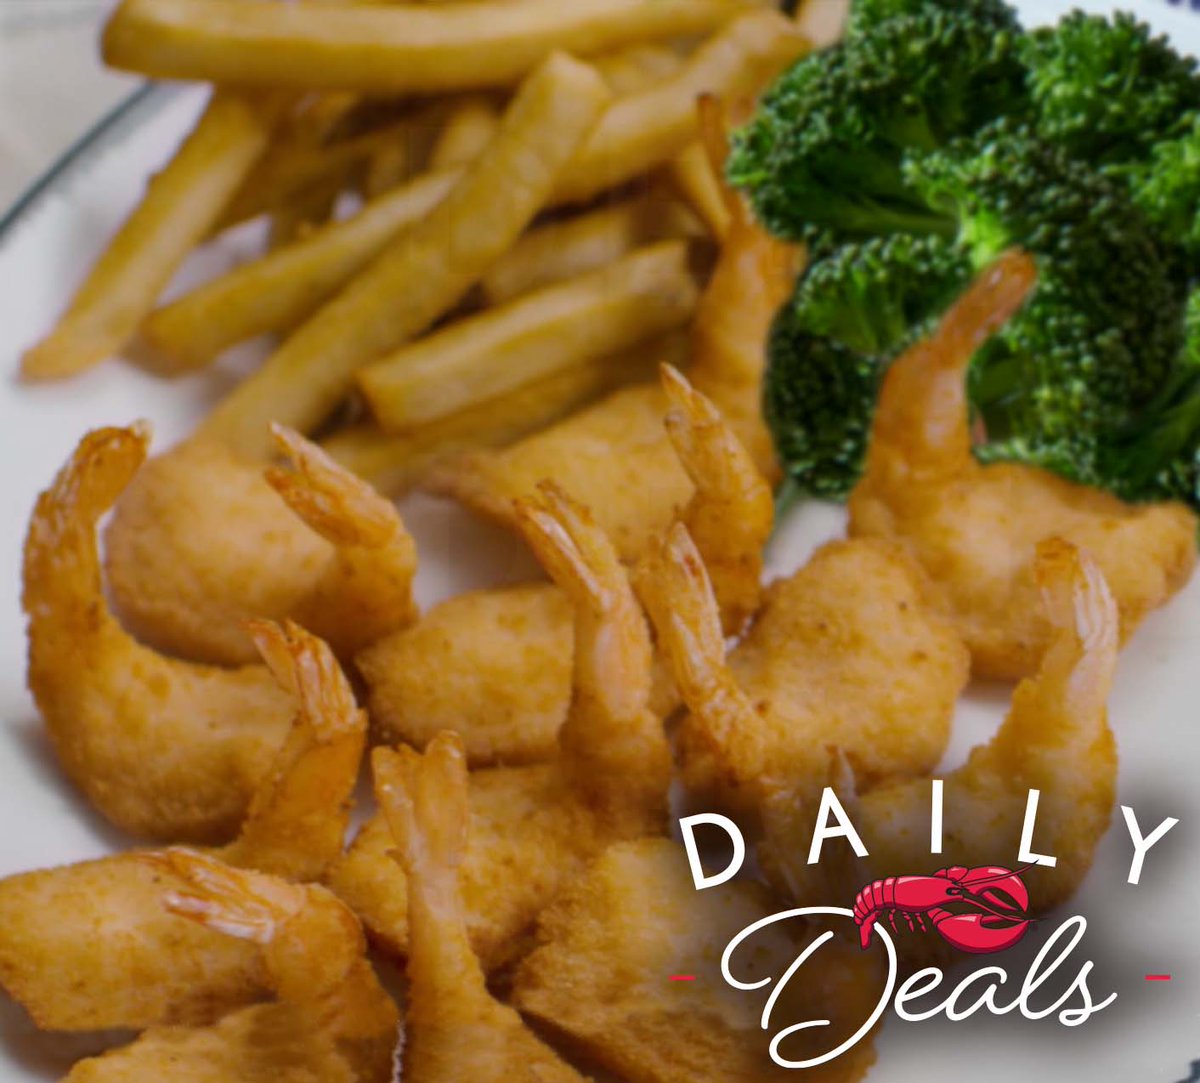 Can’t get your mind off mouthwatering shrimp? Today's deal is for you. Get Walt’s Favorite Shrimp, two sides and a pepsi product for just $12.99. 🍤🤯 *Full Terms: ms.spr.ly/6015ZcvOh